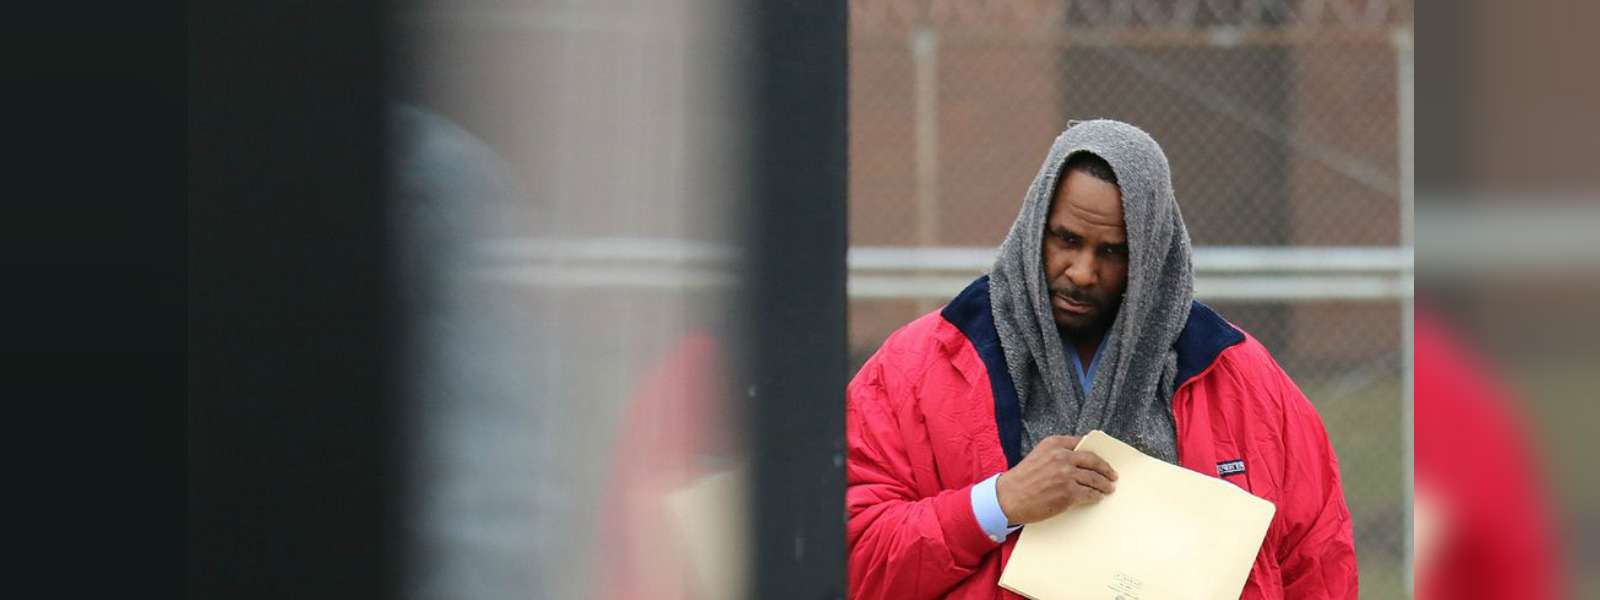 R. Kelly released; vows to straighten things